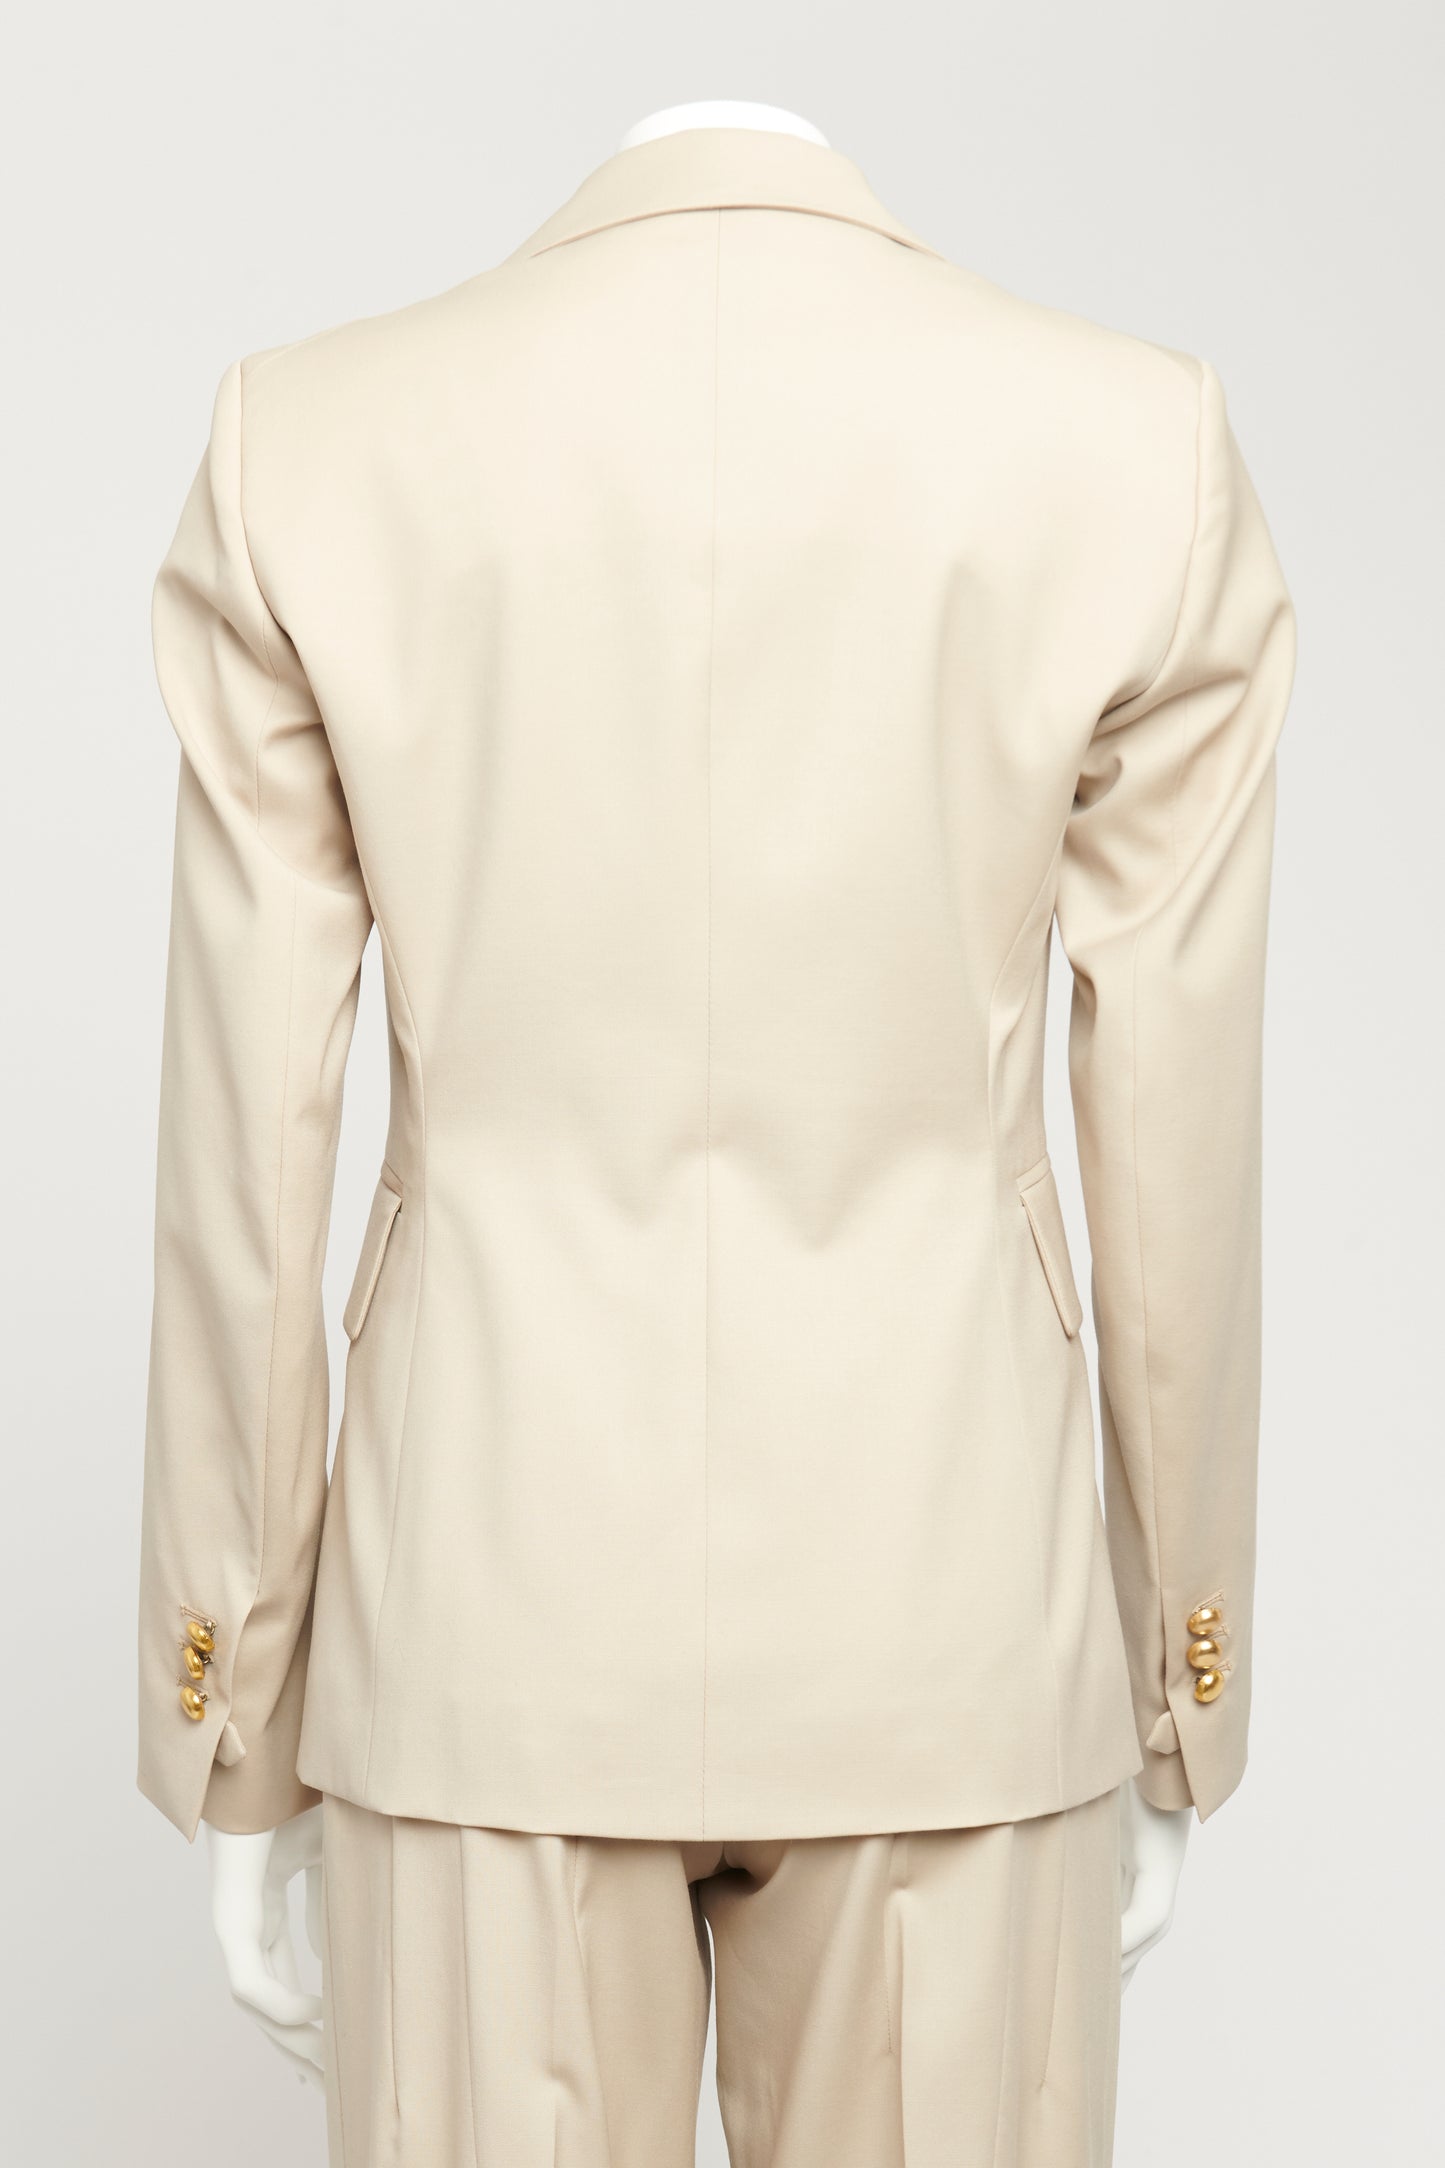 Beige Preowned Blazer and Trouser Suit